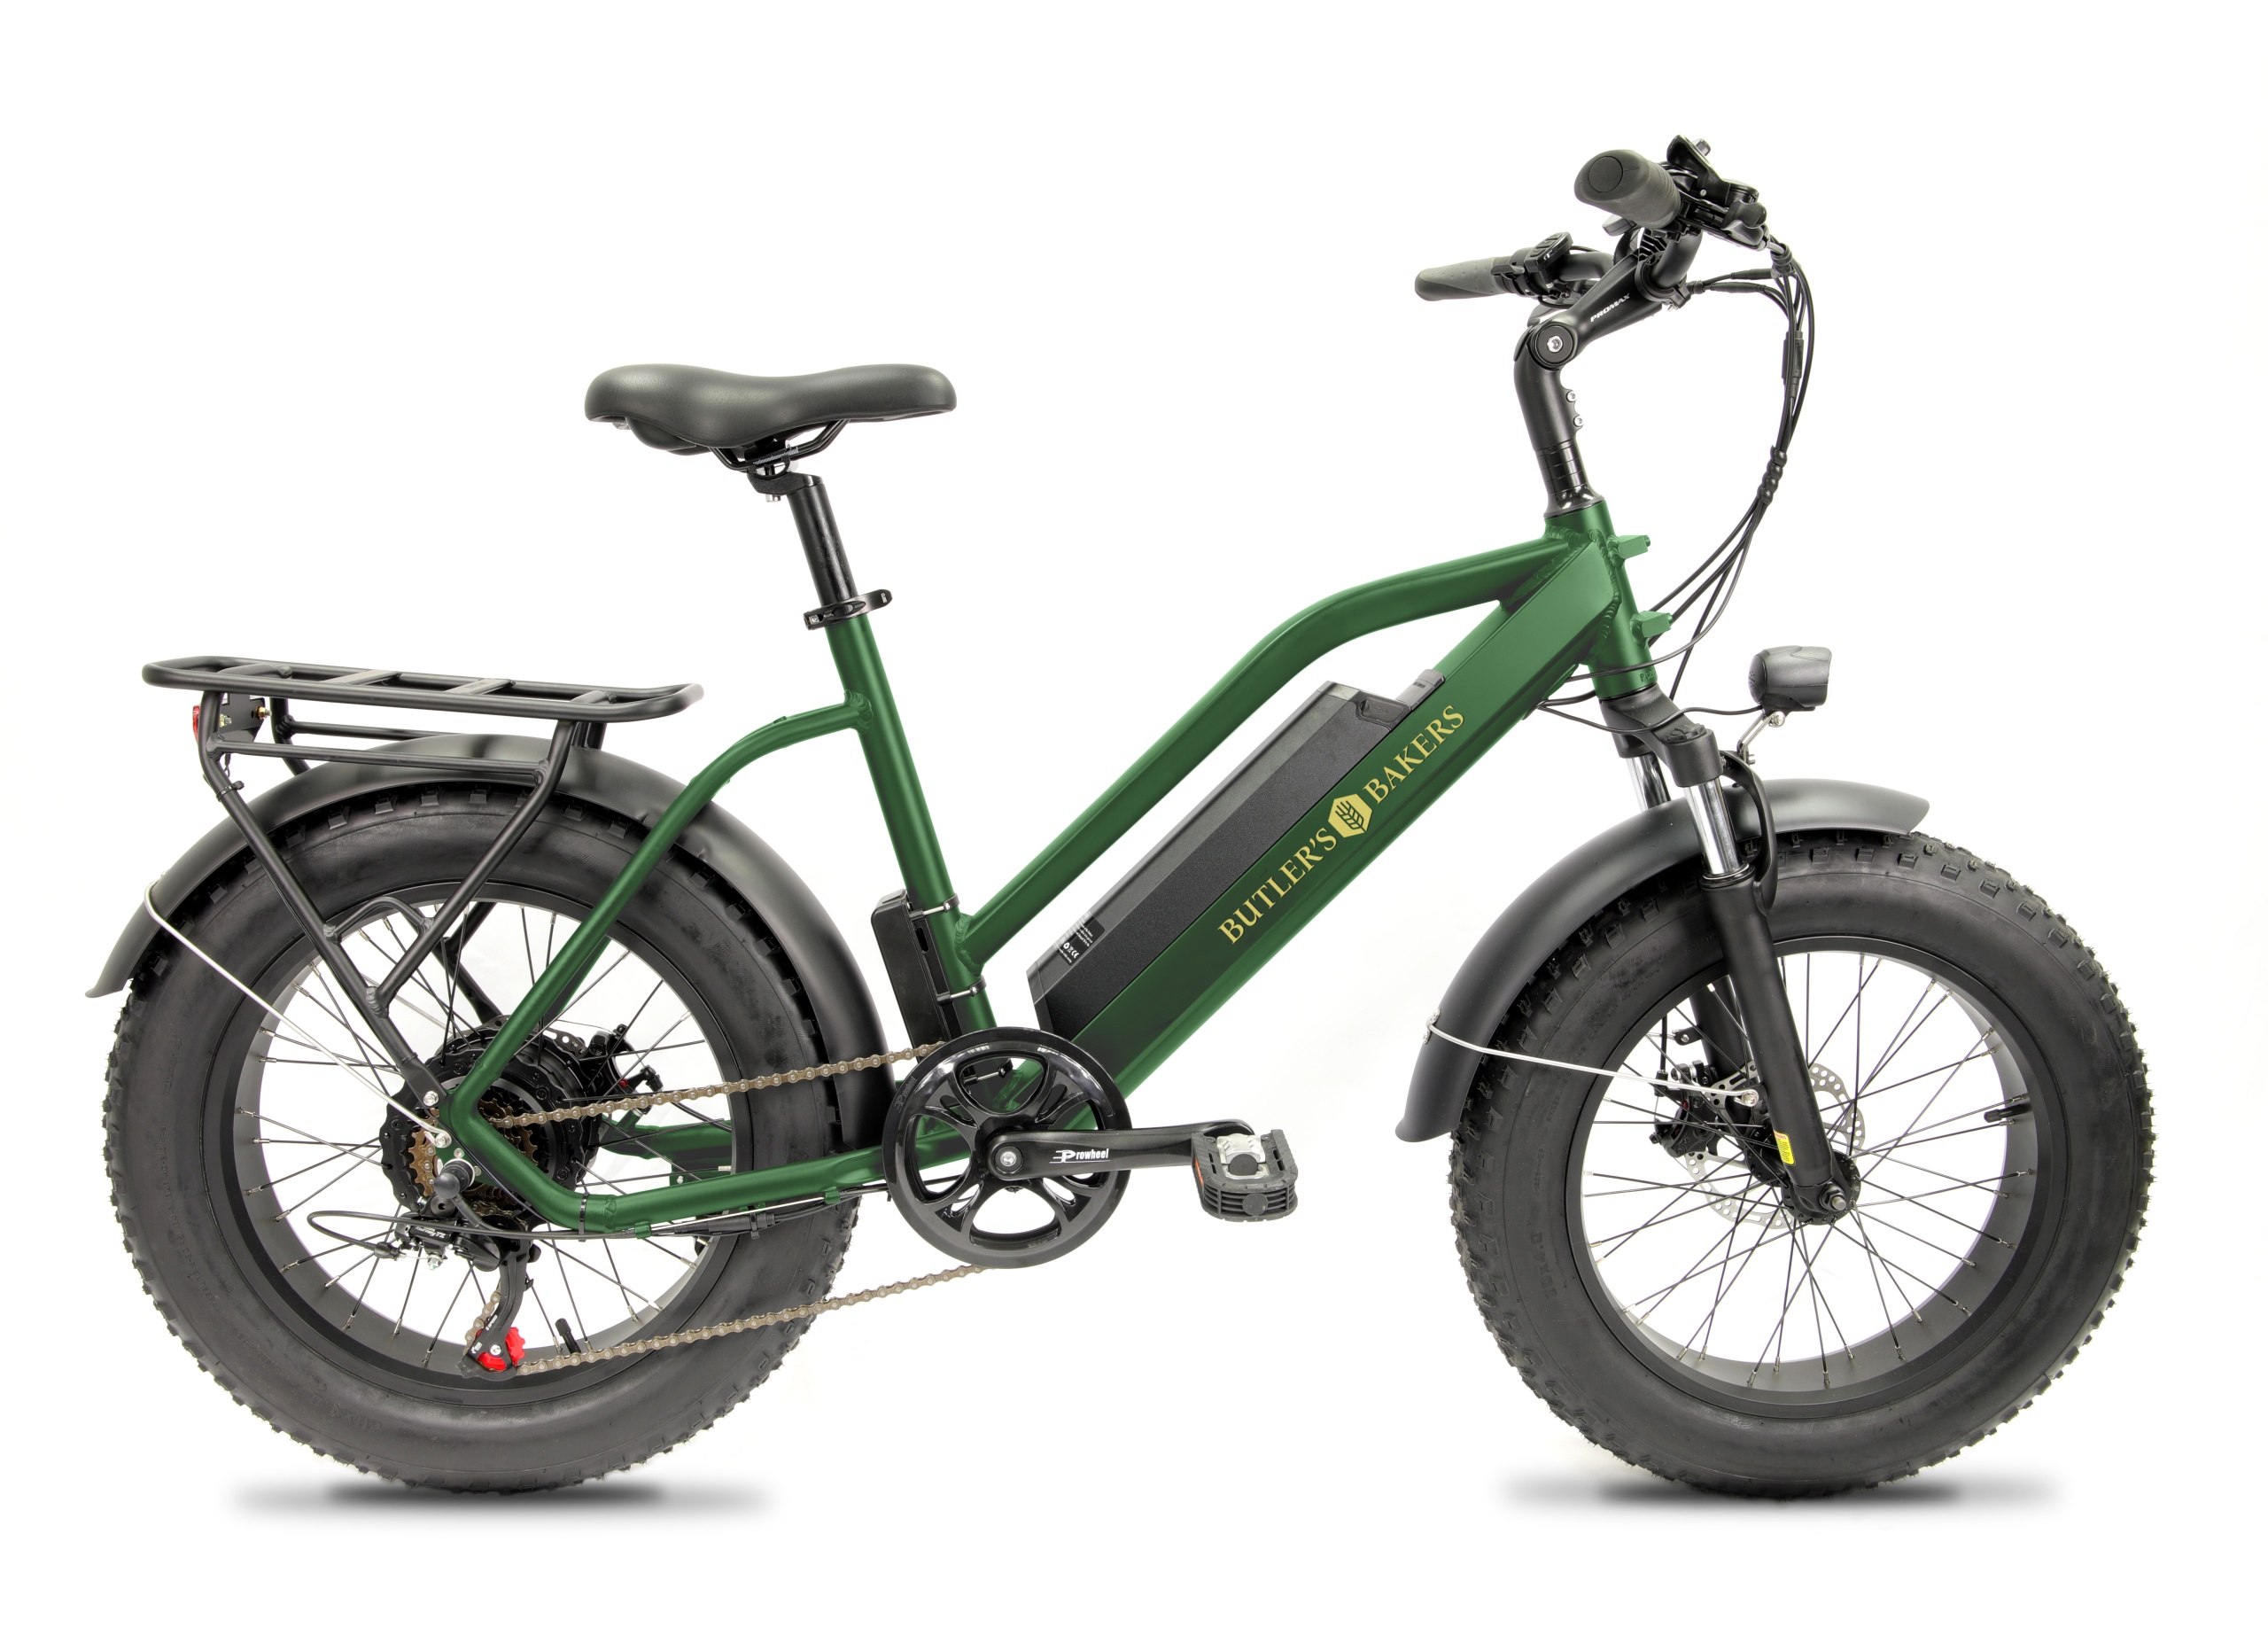 Butler's Bakers eBike by Deliver-E